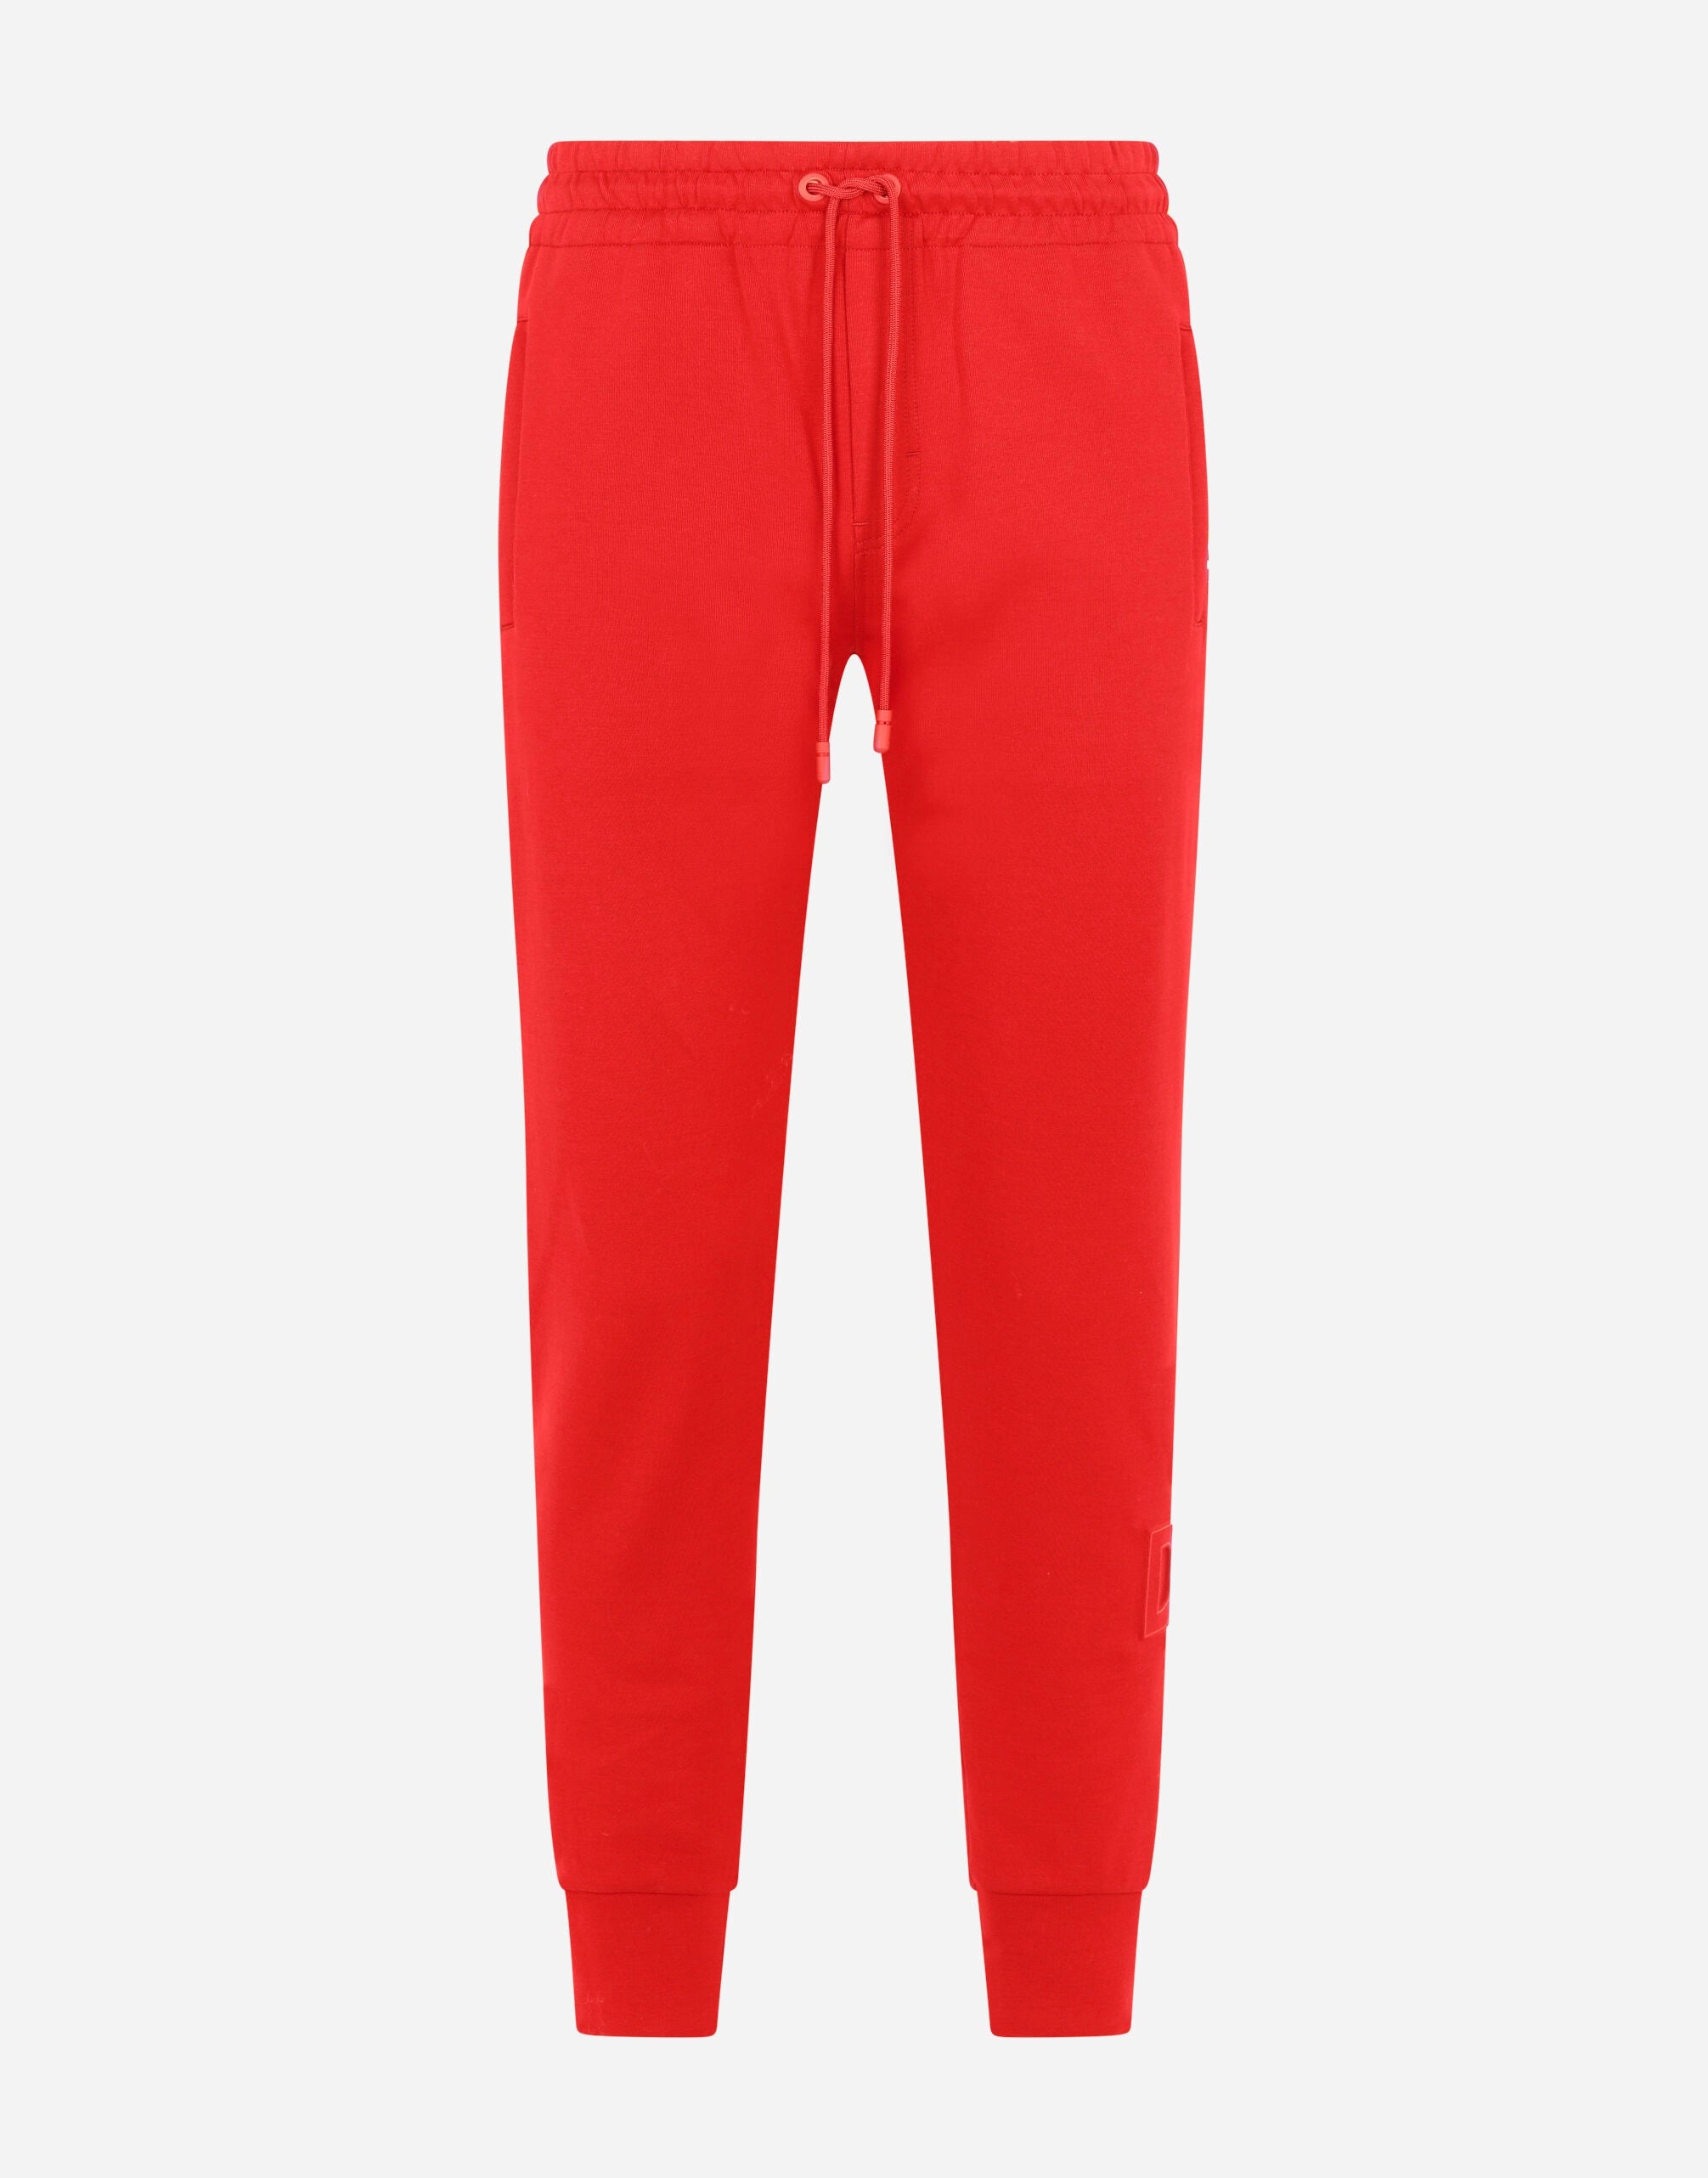 Dolce & Gabbana Jersey Jogging Pants With DG Patch